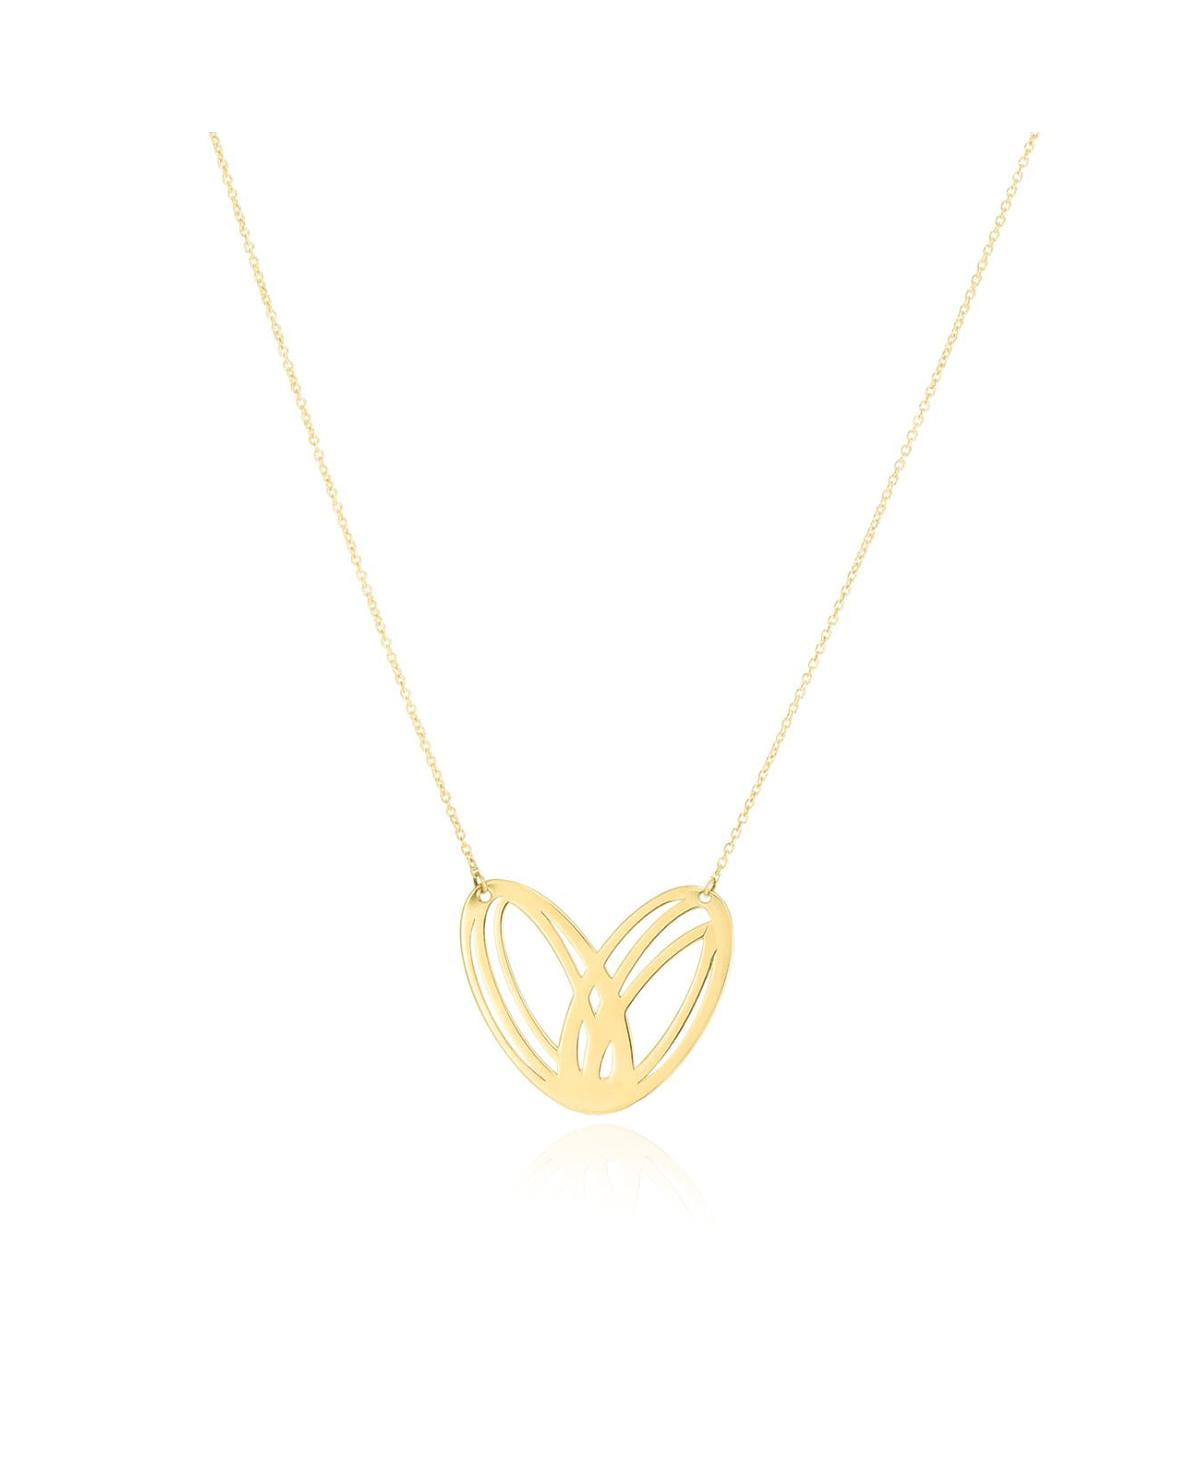 Gold Woven Heart Necklace - Gold